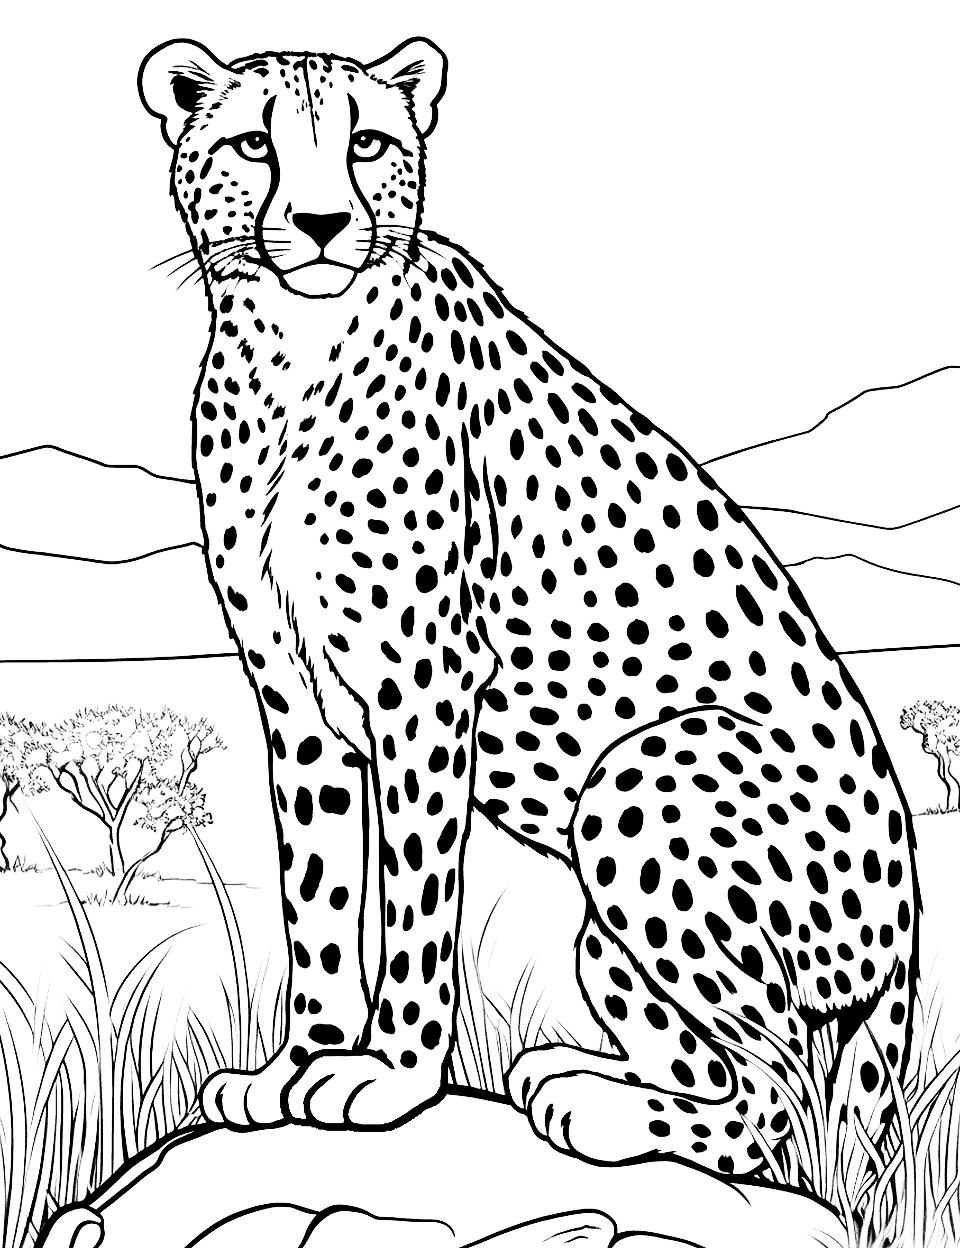 South African Cheetah Coloring Page - A beautiful South African cheetah out looking for prey to hunt.